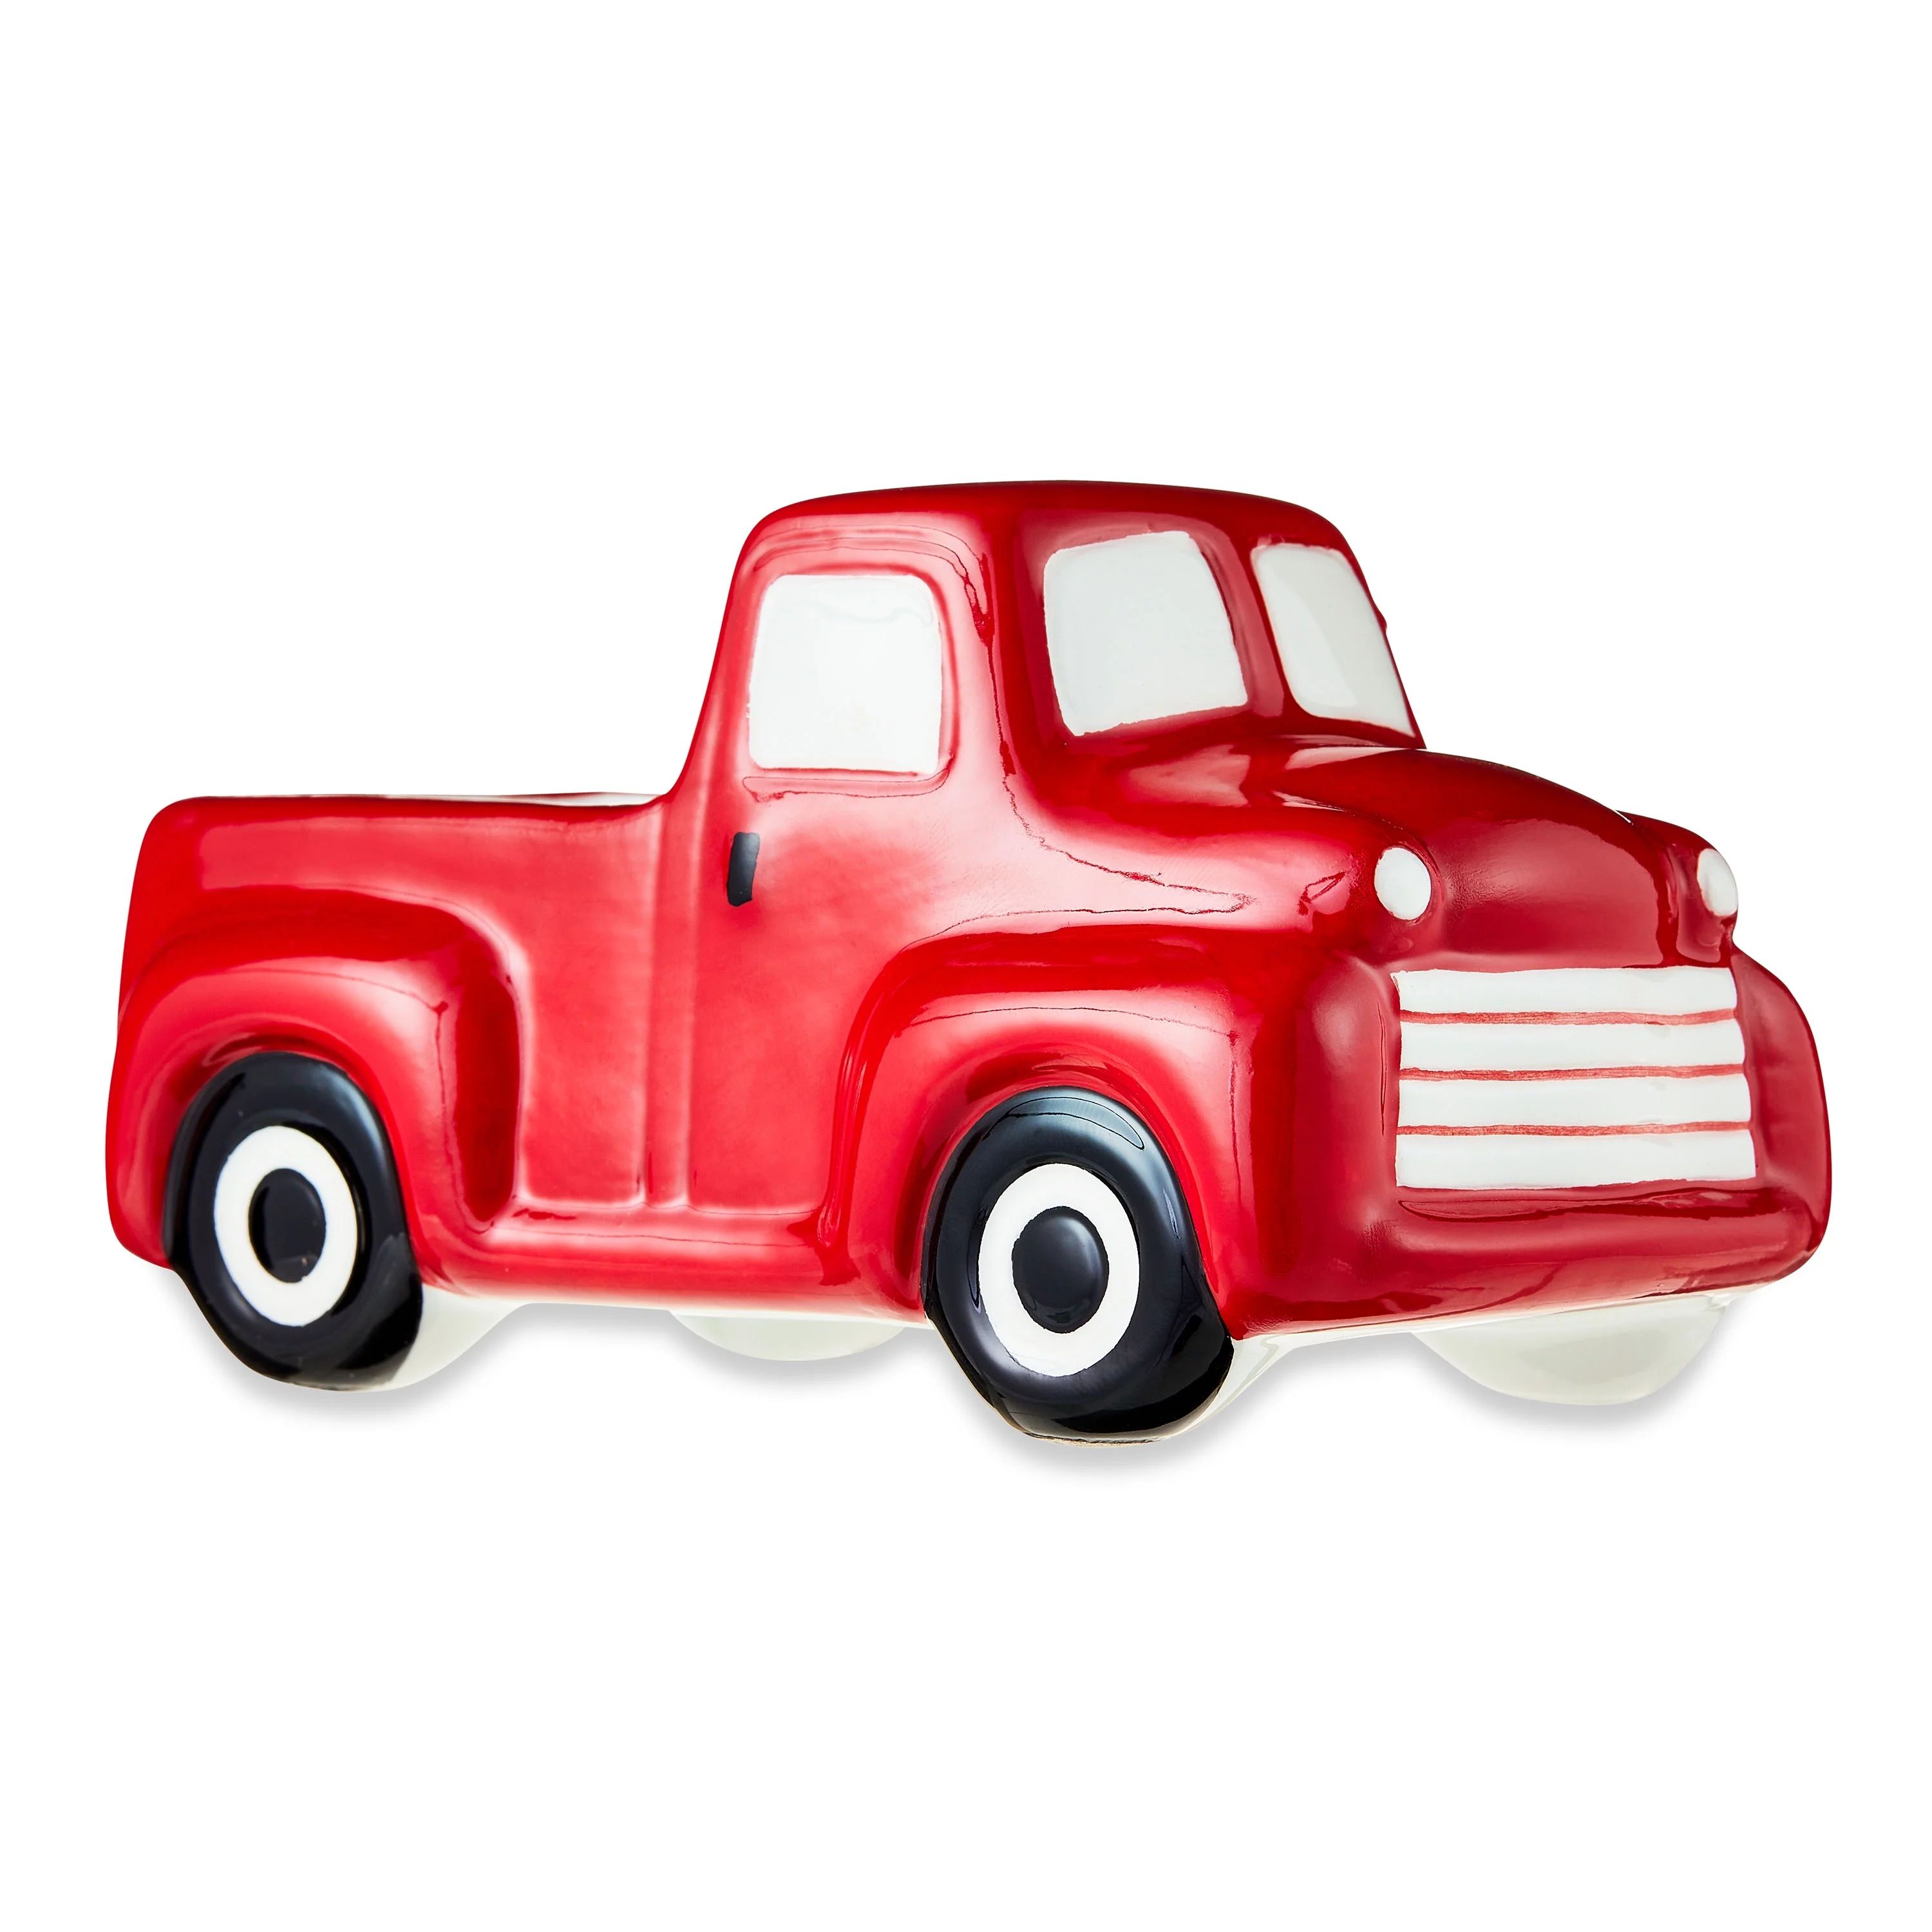 Ceramic Red Truck Décor 3 in x 6 in, by Holiday Time | Walmart (US)